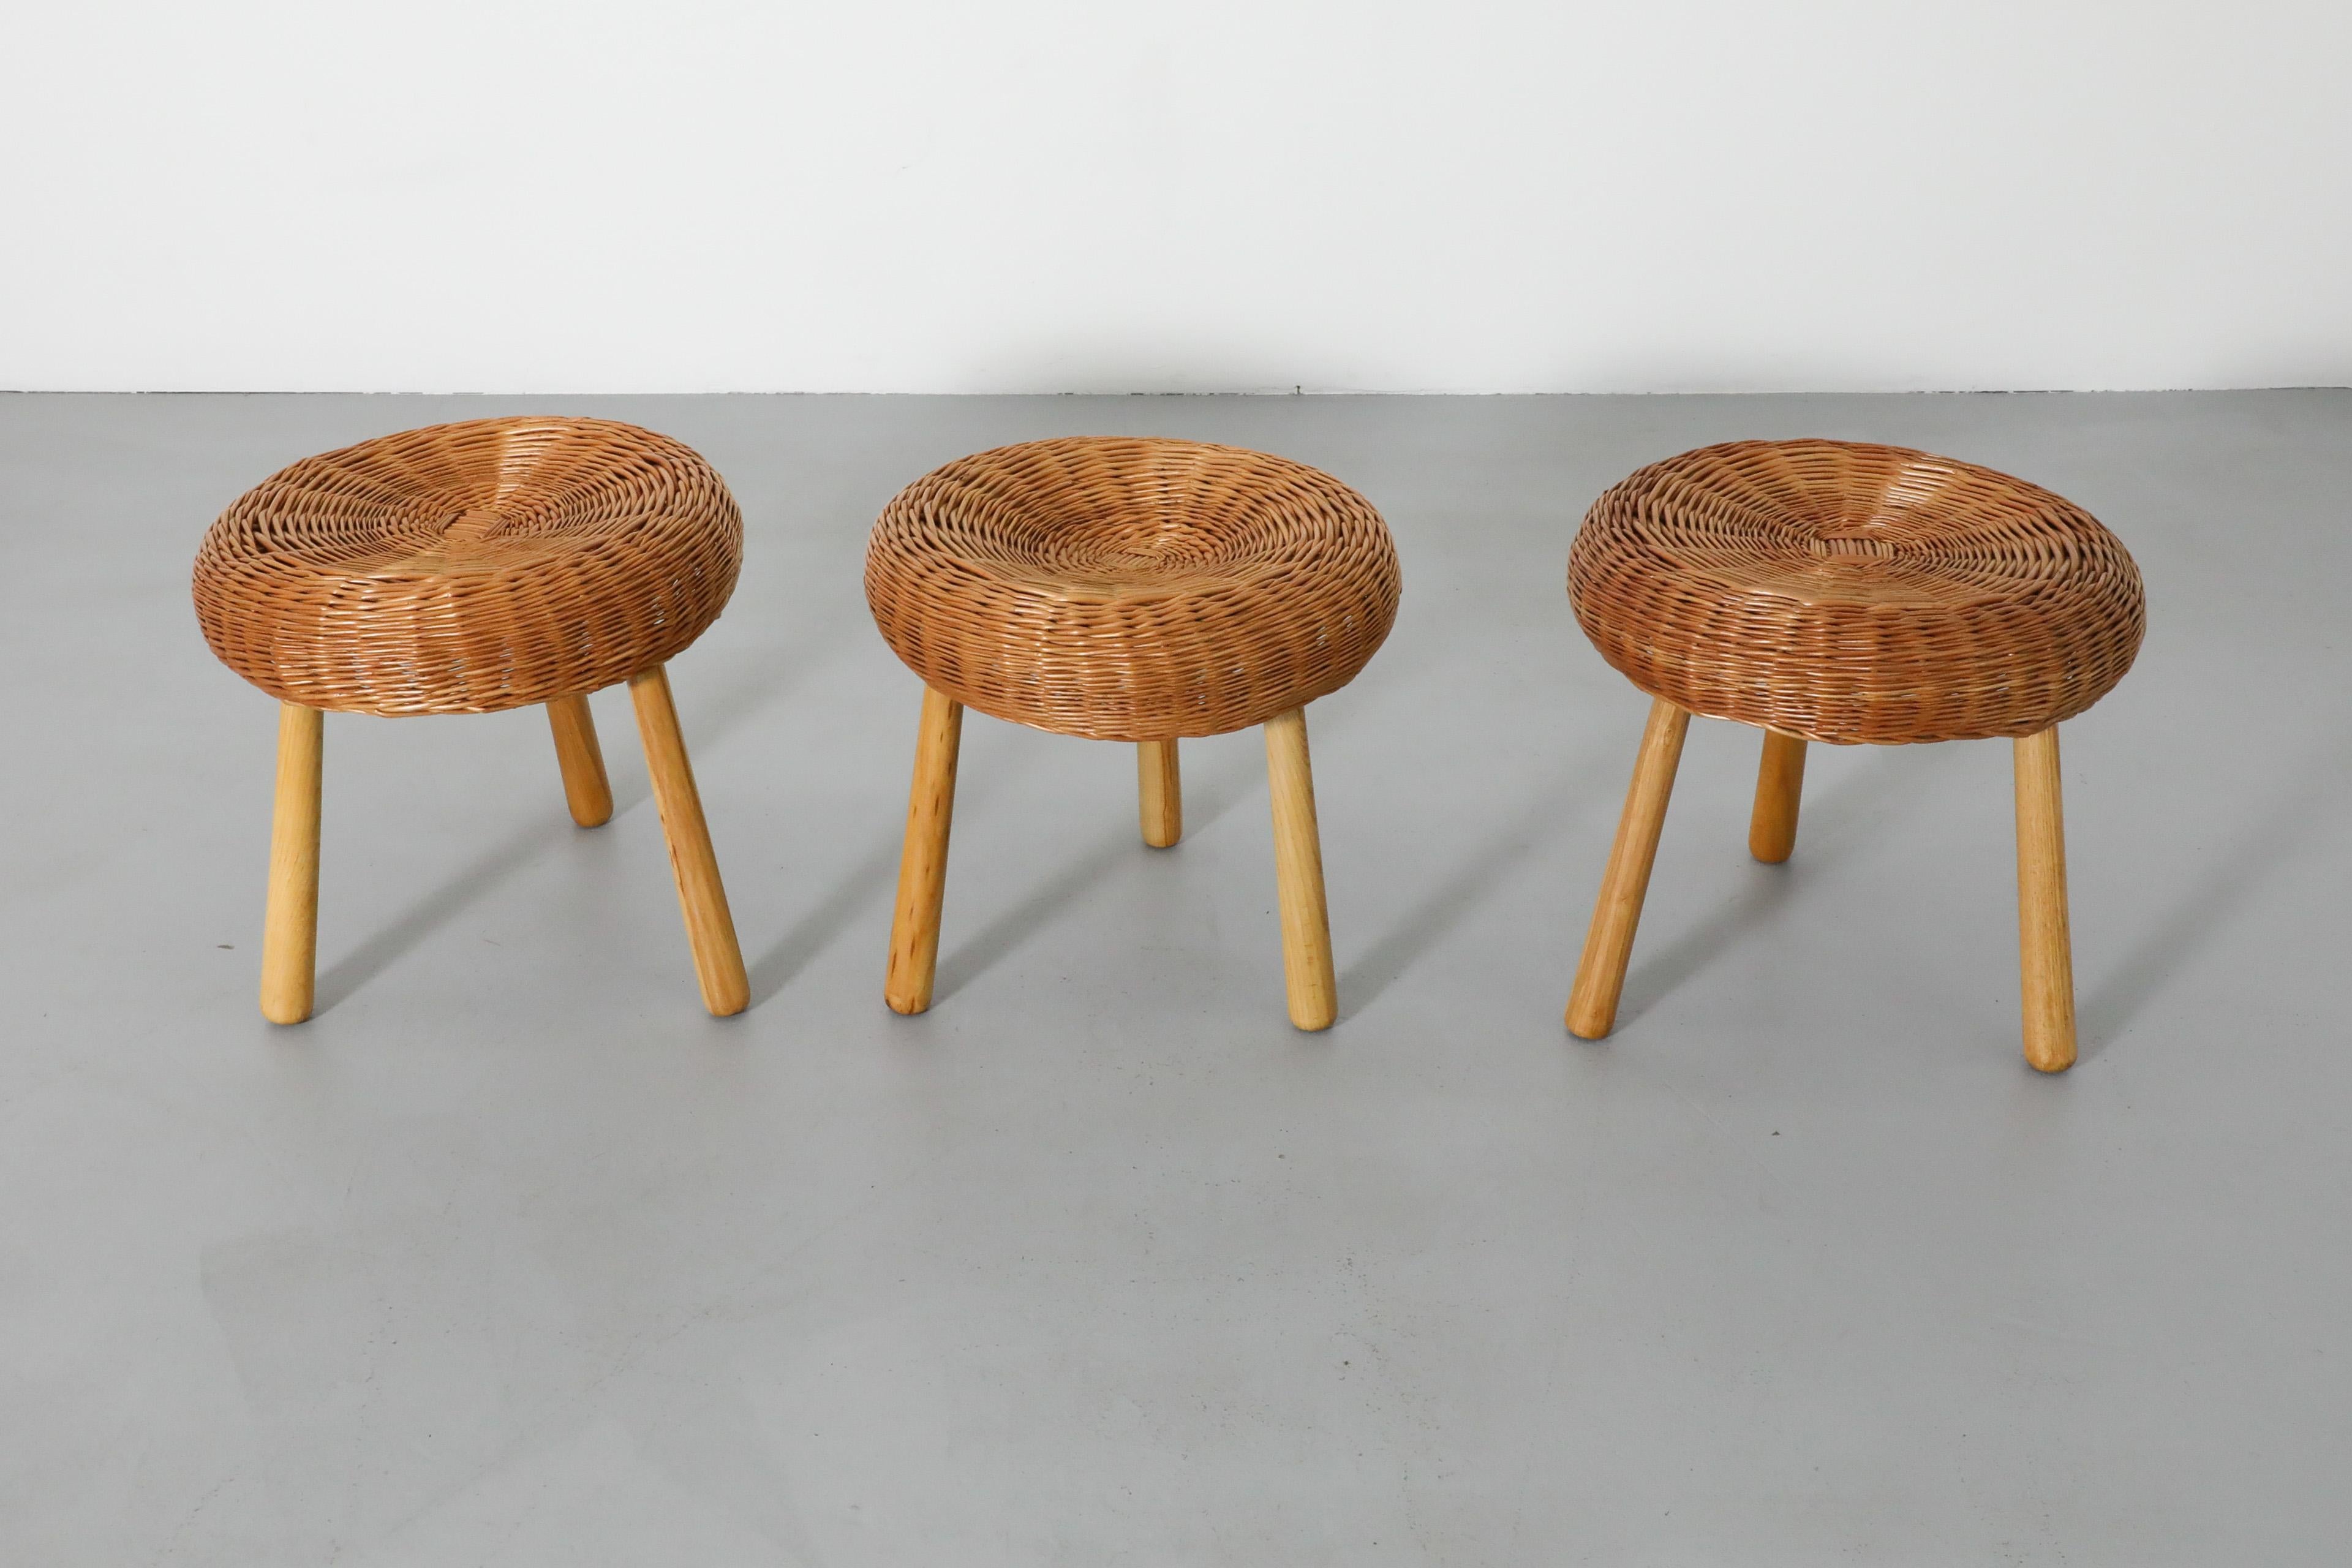 Tony Paul Attributed Woven Rattan Tripod Stools with Tapered Solid Wood Legs In Good Condition For Sale In Los Angeles, CA